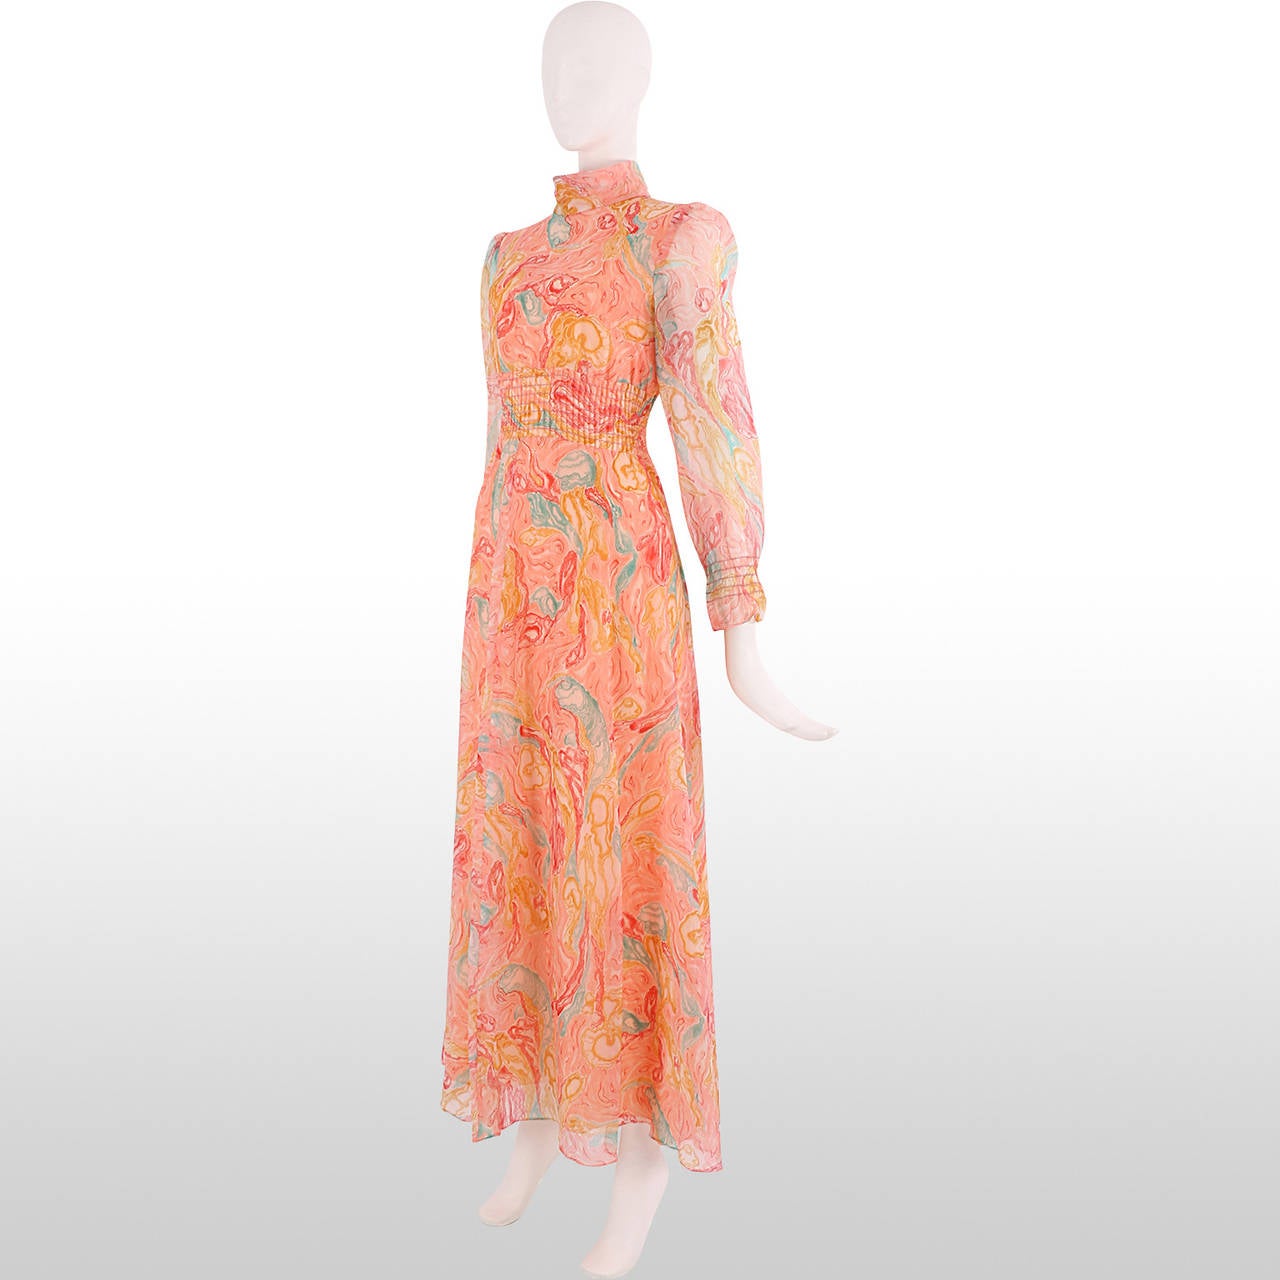 This 1970's gown is made from a printed chiffon overlay in tones of peach, turquoise, mustard yellow and crimson to create a marbled effect. It has a high standing collar and full length sleeves. The waist is nipped in with a wide band of elastic